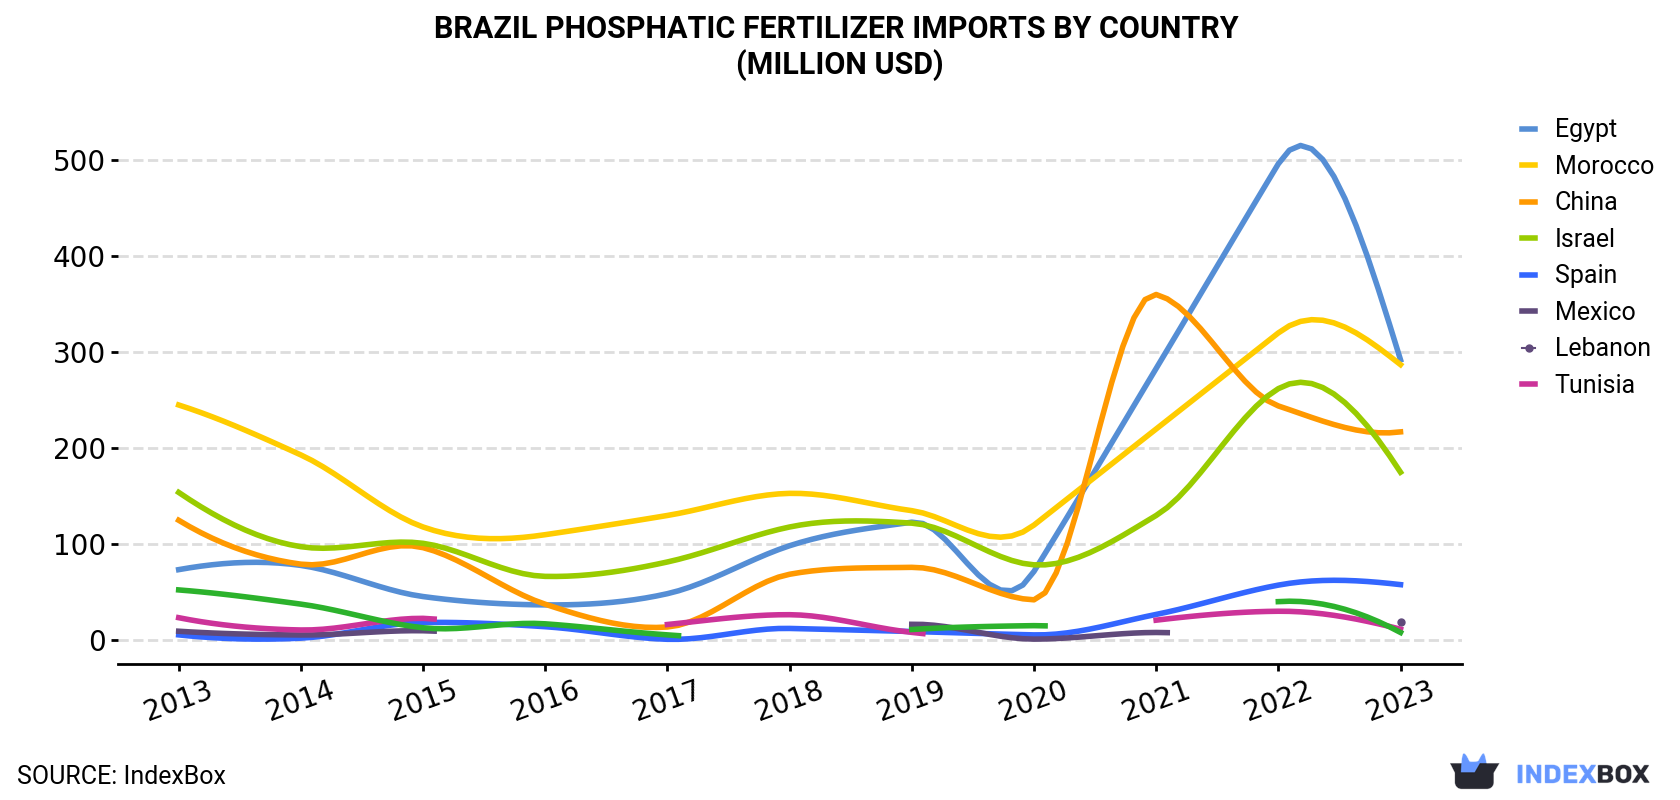 Brazil Phosphatic Fertilizer Imports By Country (Million USD)